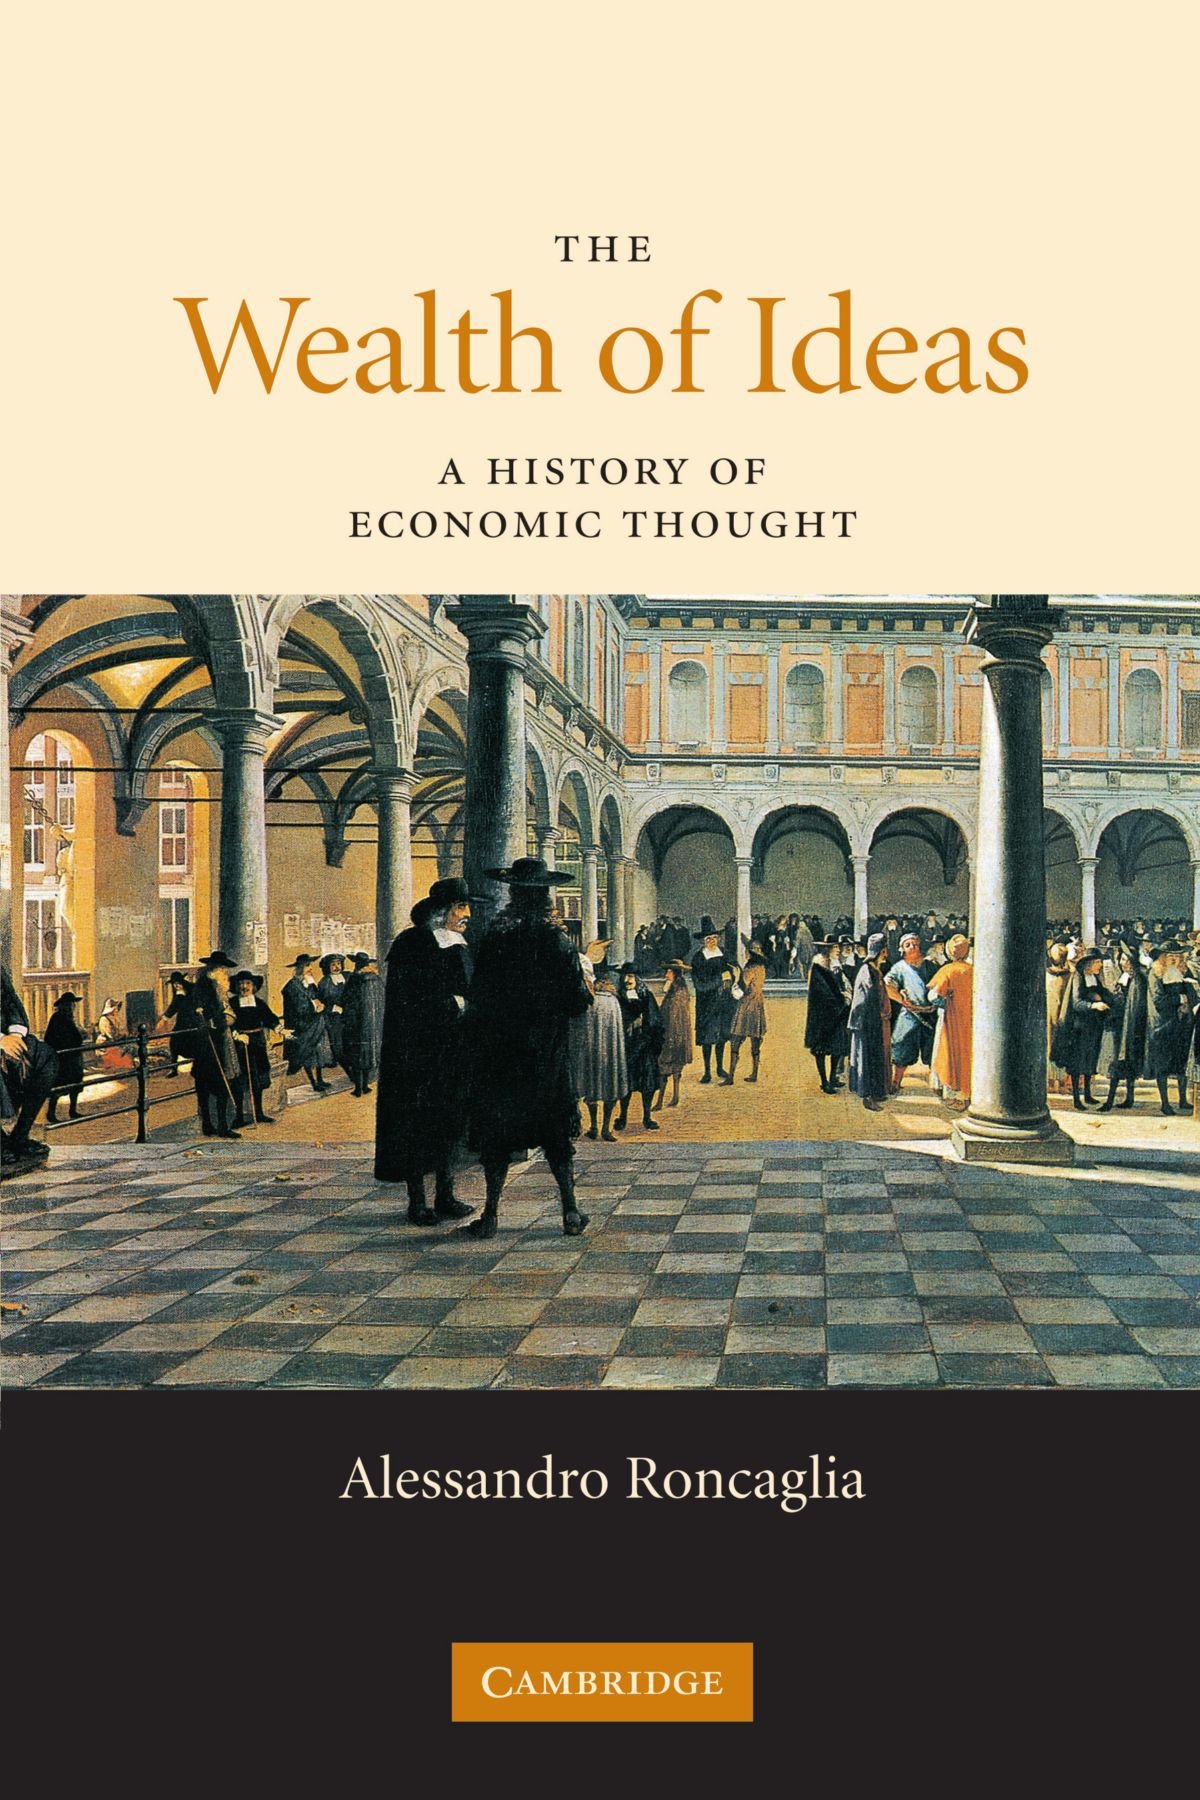 Economic thought and History. A brief History of economic thought. The Wealth of ideas. Idea history